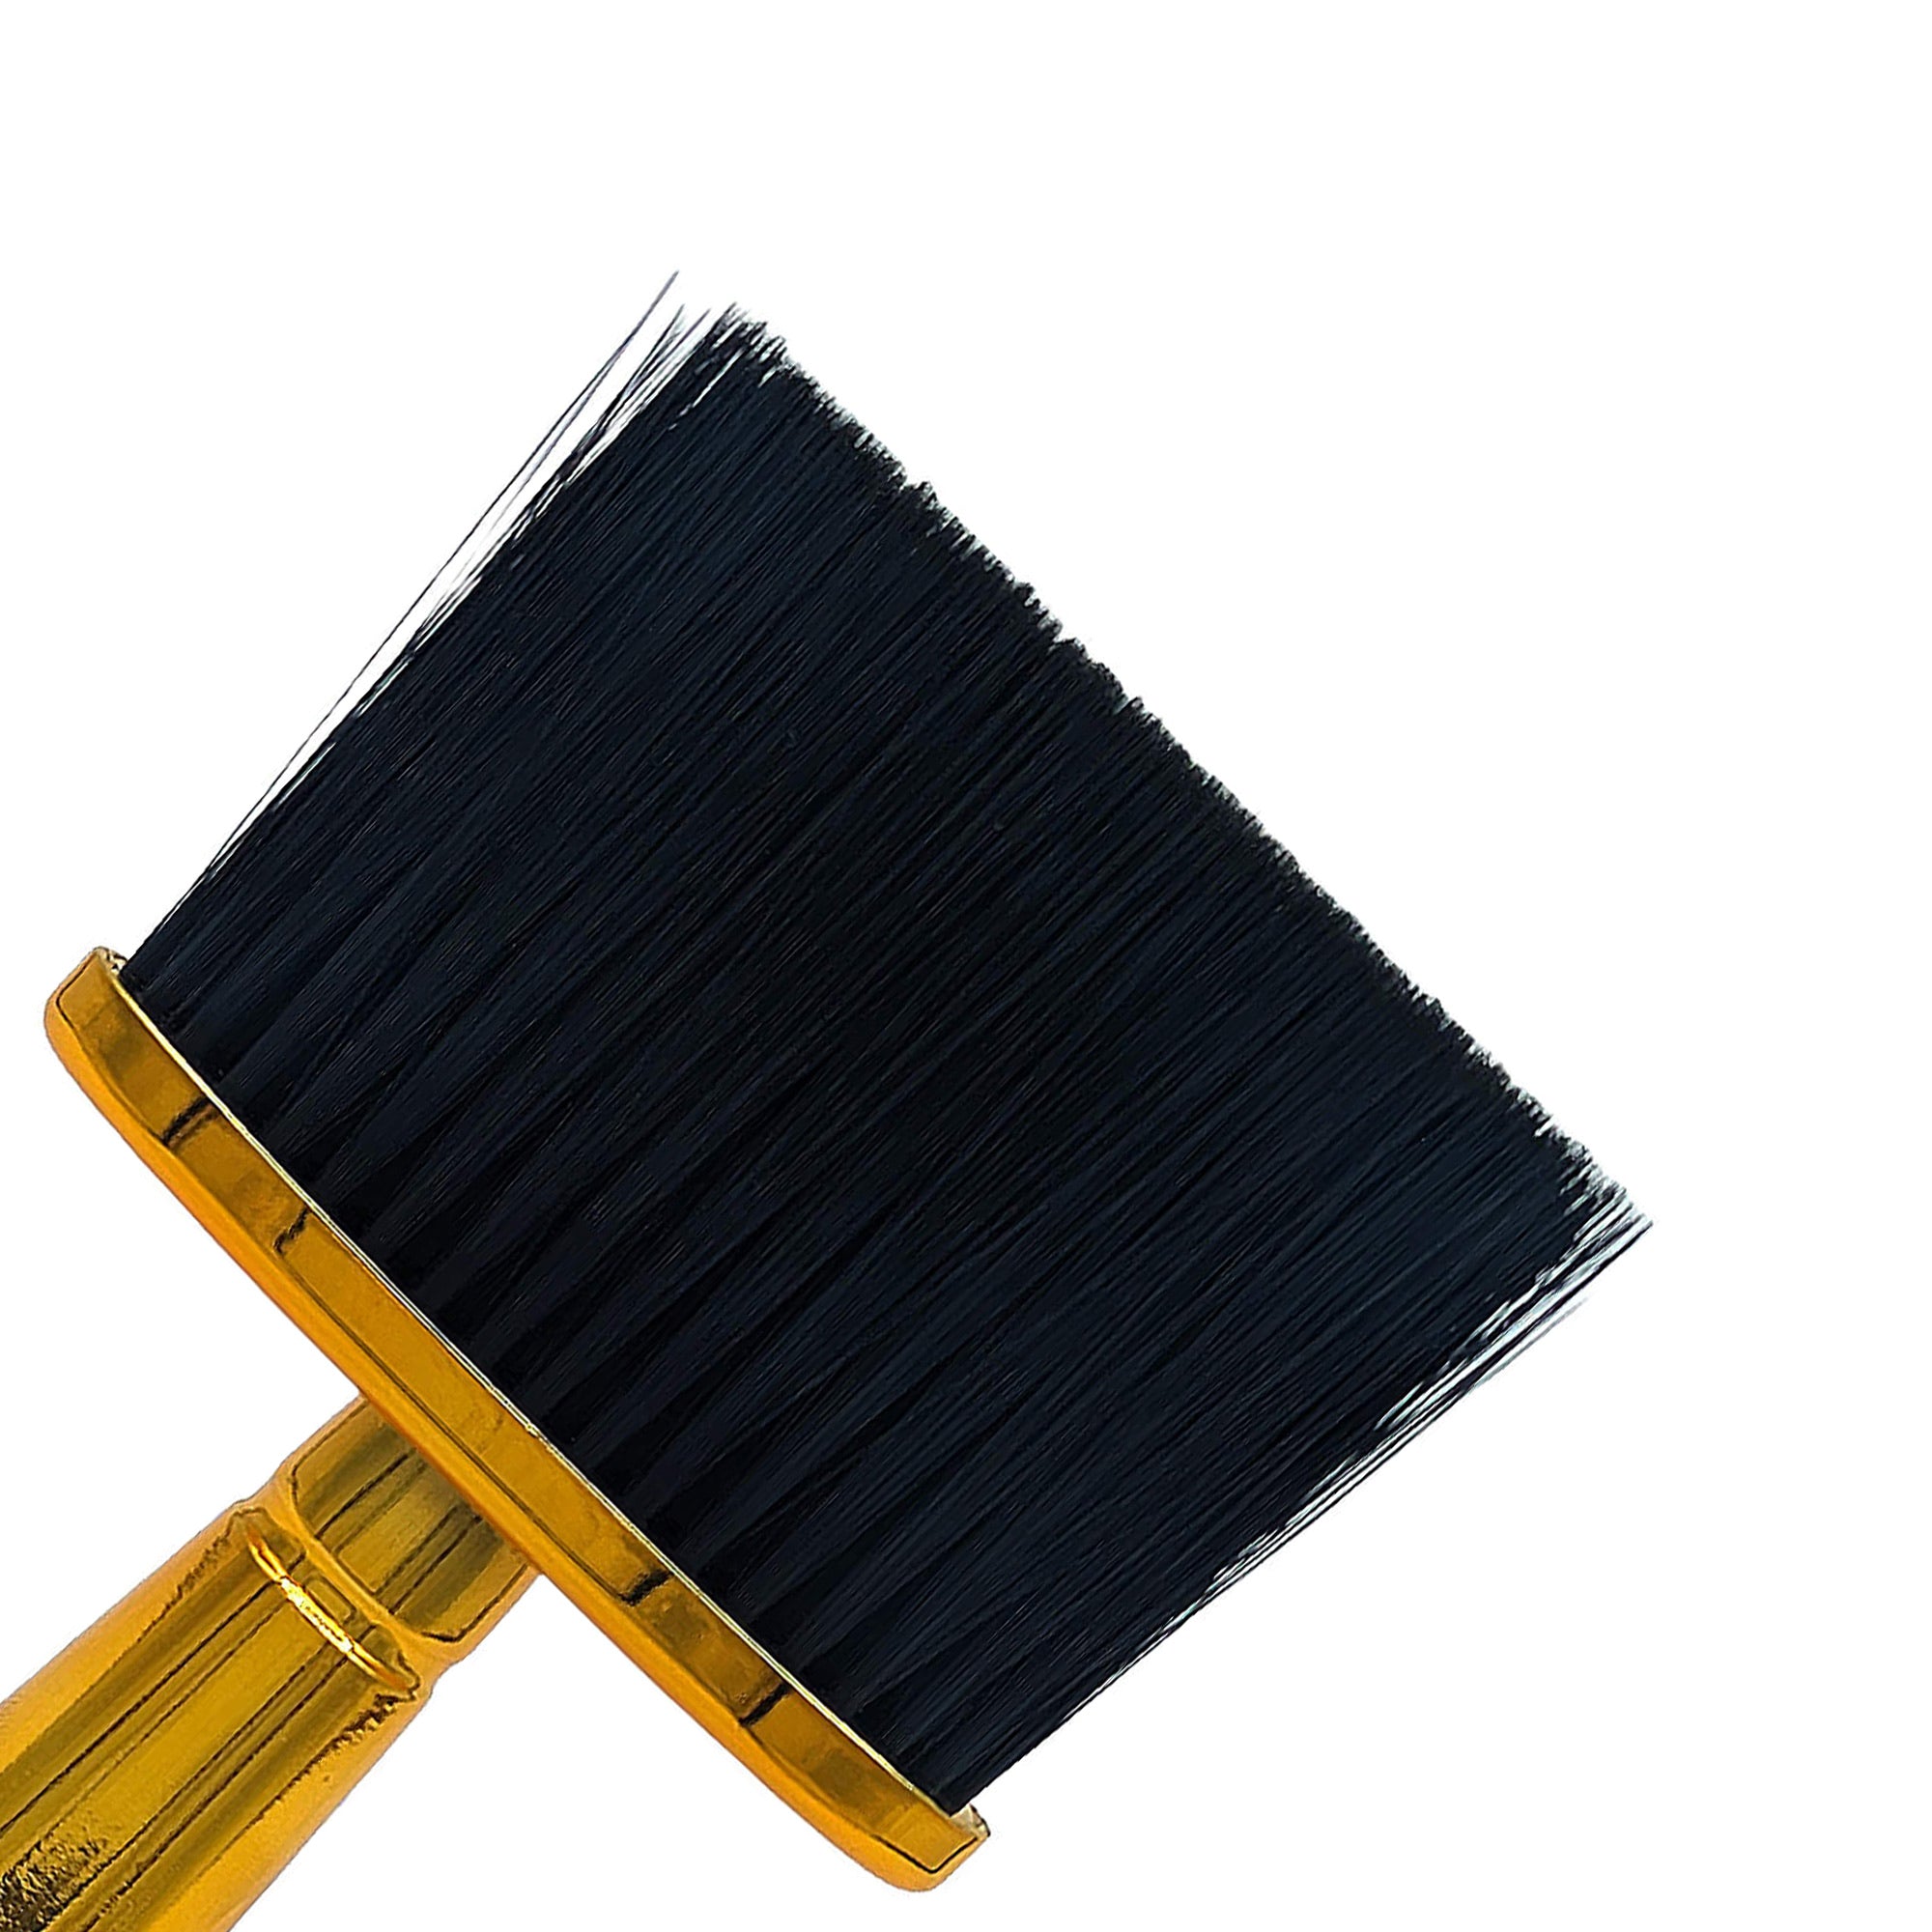 Eson - Neck Duster Brush Ultra-Soft Comfort During Use 15x10cm (Gold)